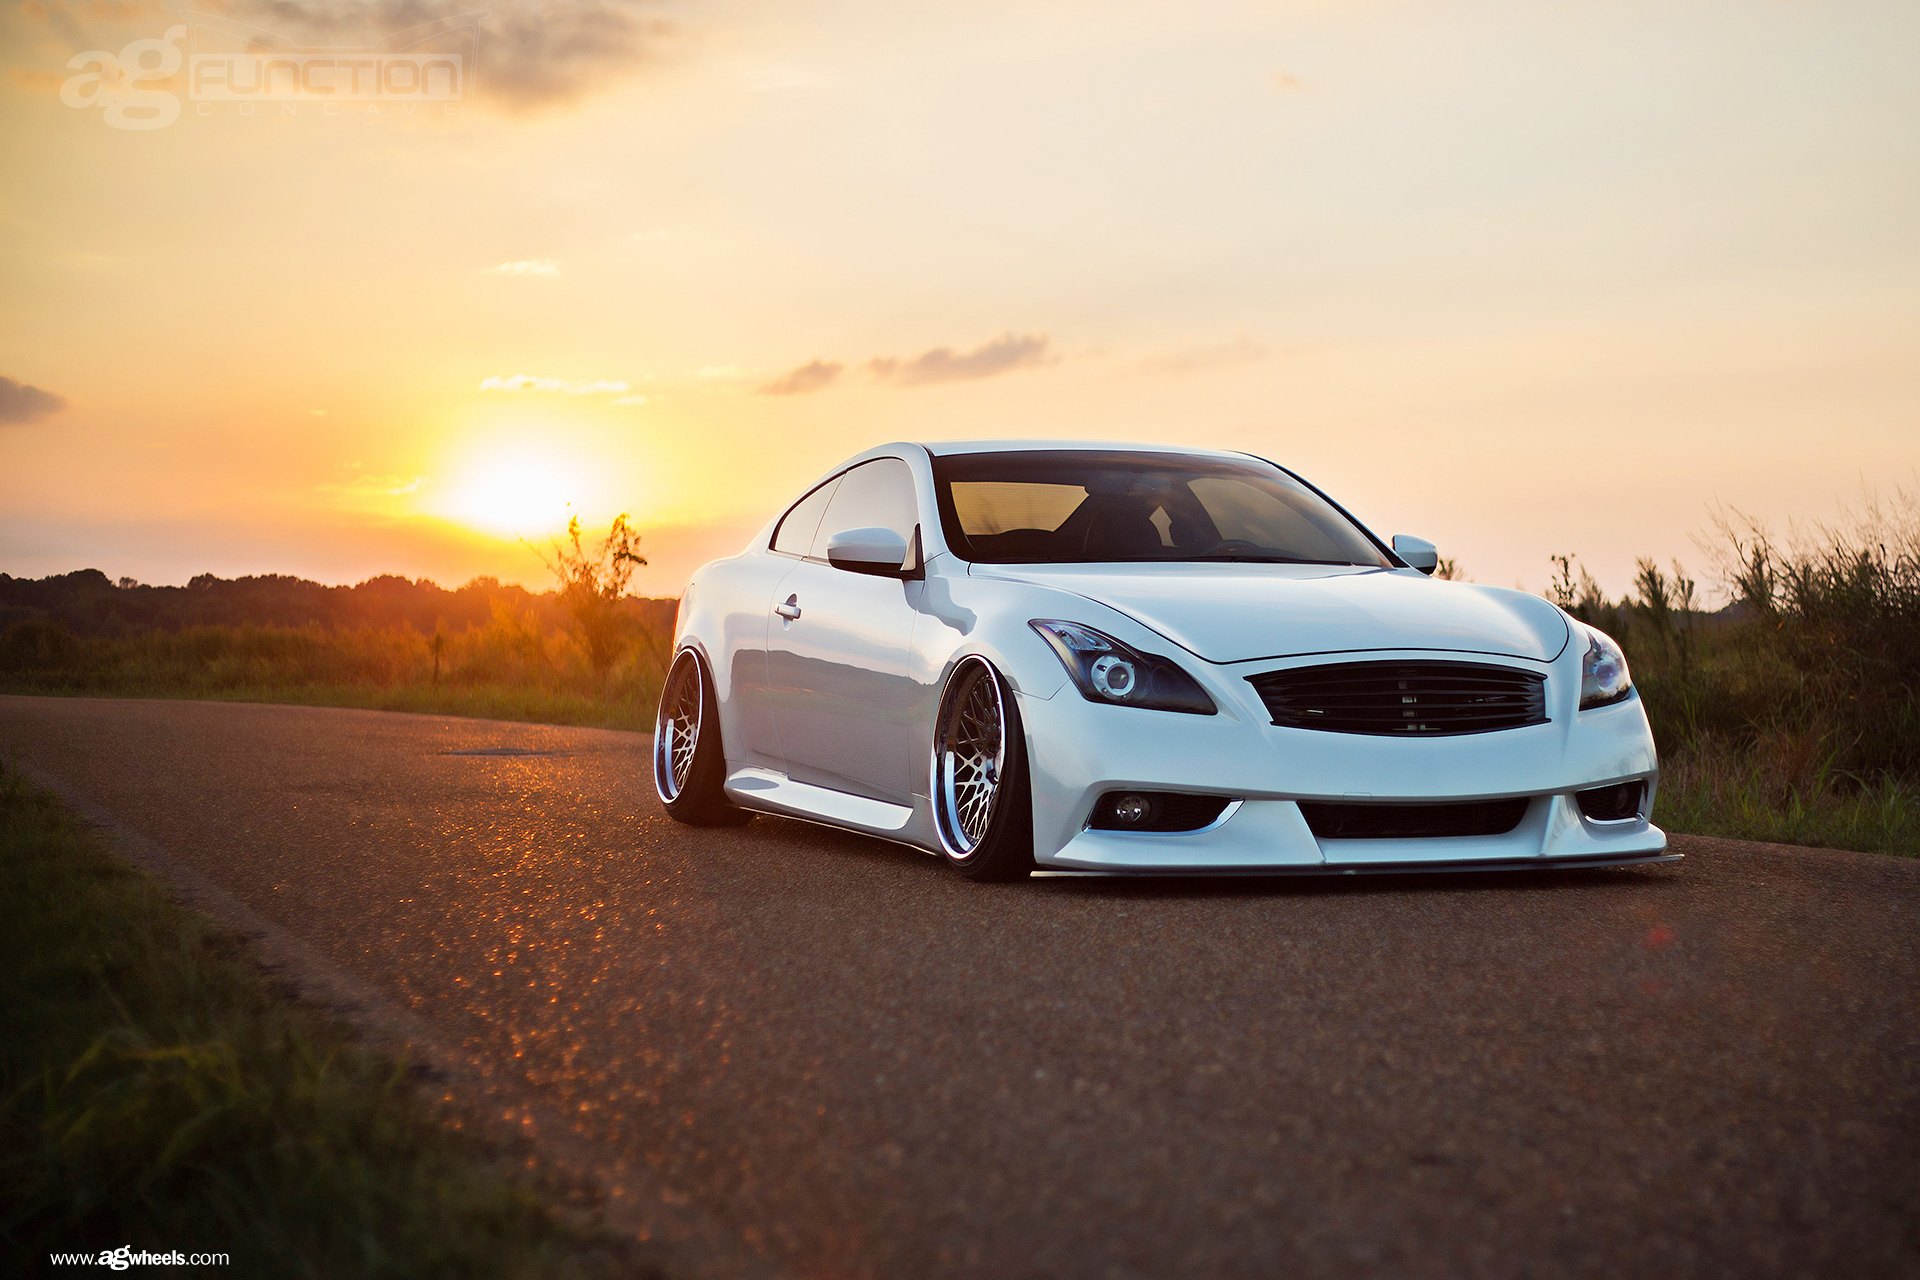 White Stanced Infiniti G37 with Blacked Out Grille - Photo by Avant Garde Wheels